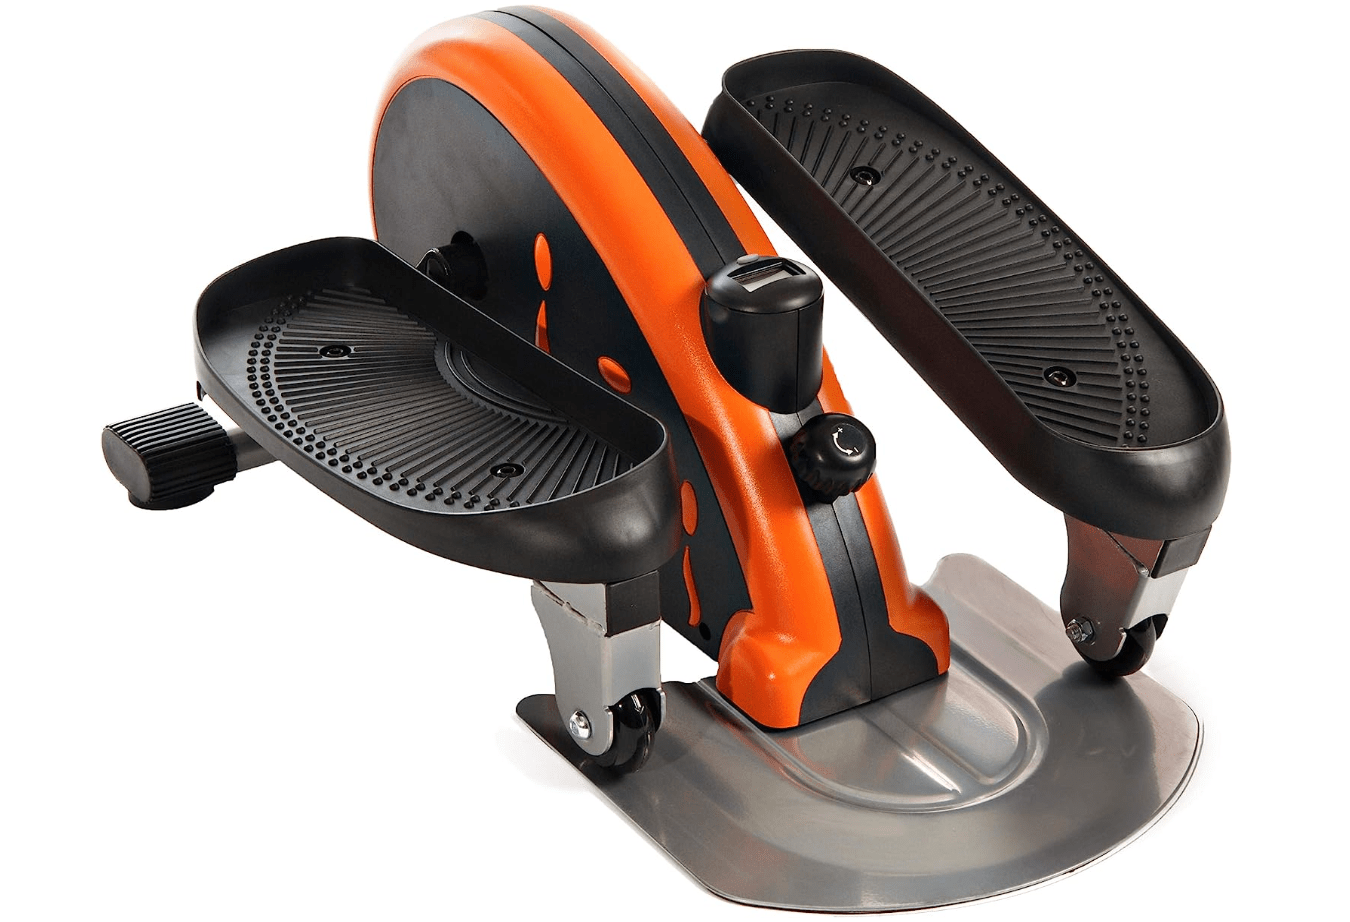 The stamina inmotion E1000 under-desk elliptical for at-home workouts